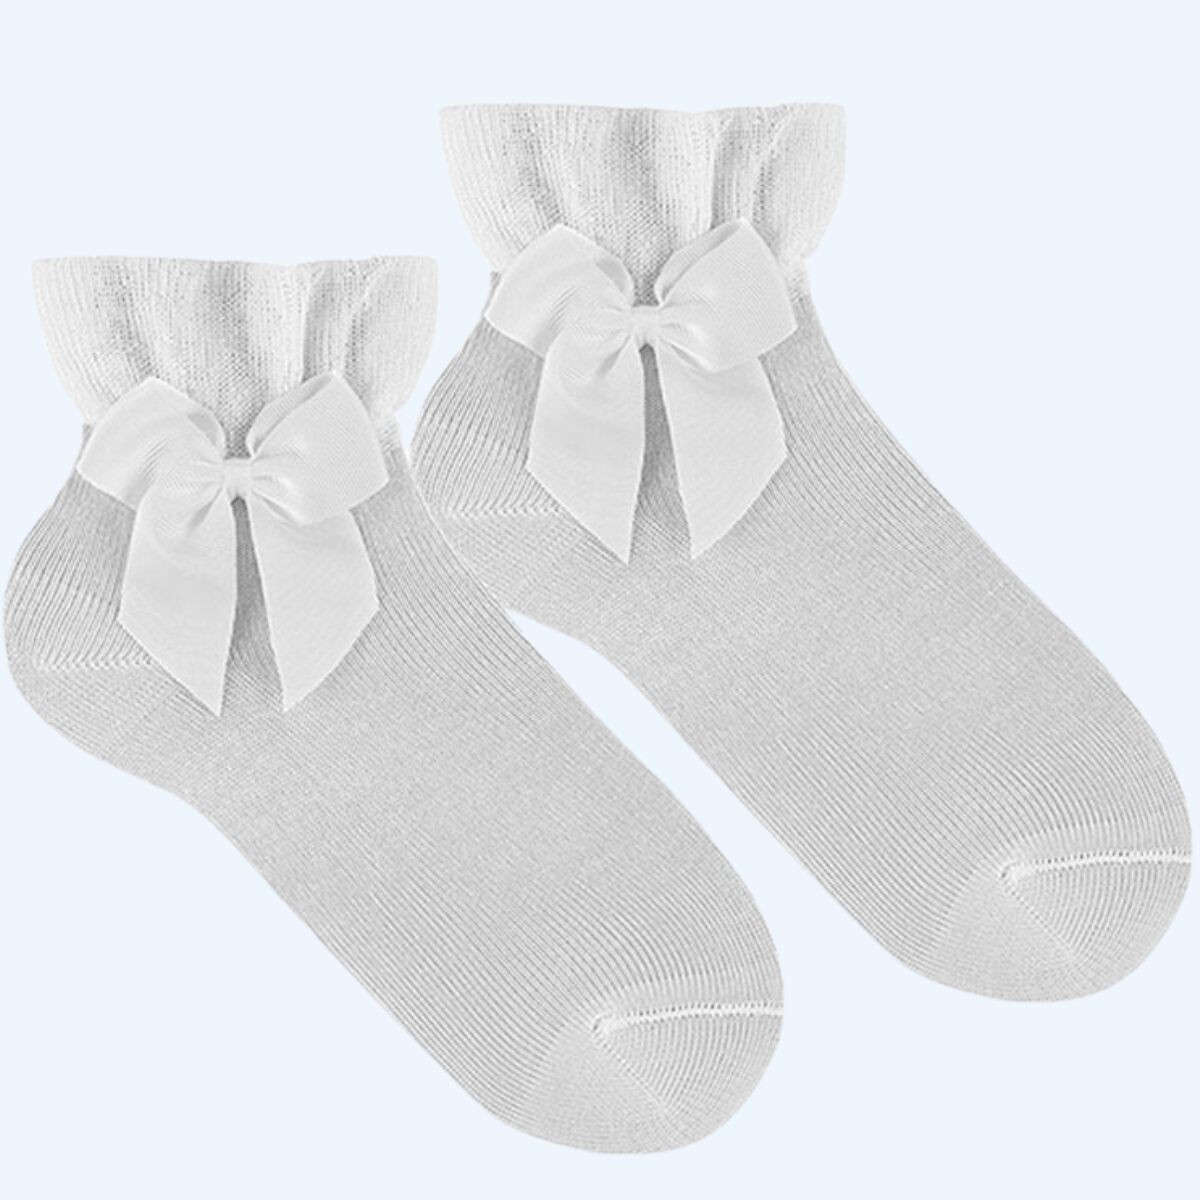 CEREMONY ANKLE SOCKSWITH GROSSGRAIN BOW CONDOR - 2